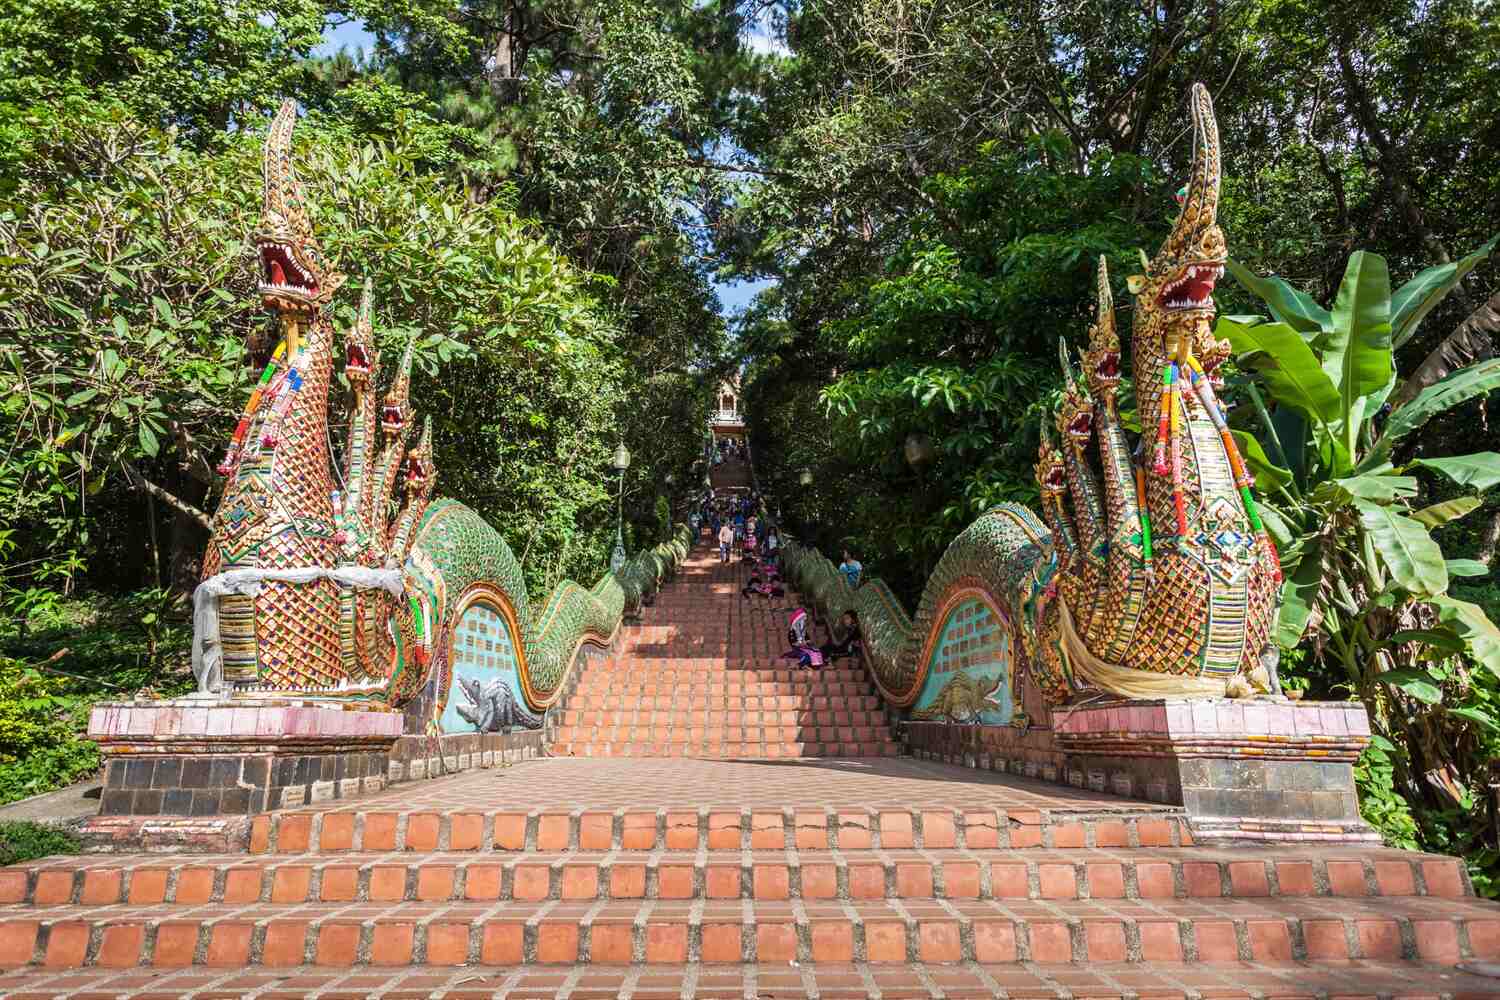 A long stone staircase flanked by greenery and mythical serpent-like statues in a traditional Asian architectural style. Get to Doi Suthep in Chiang Mai Thailand